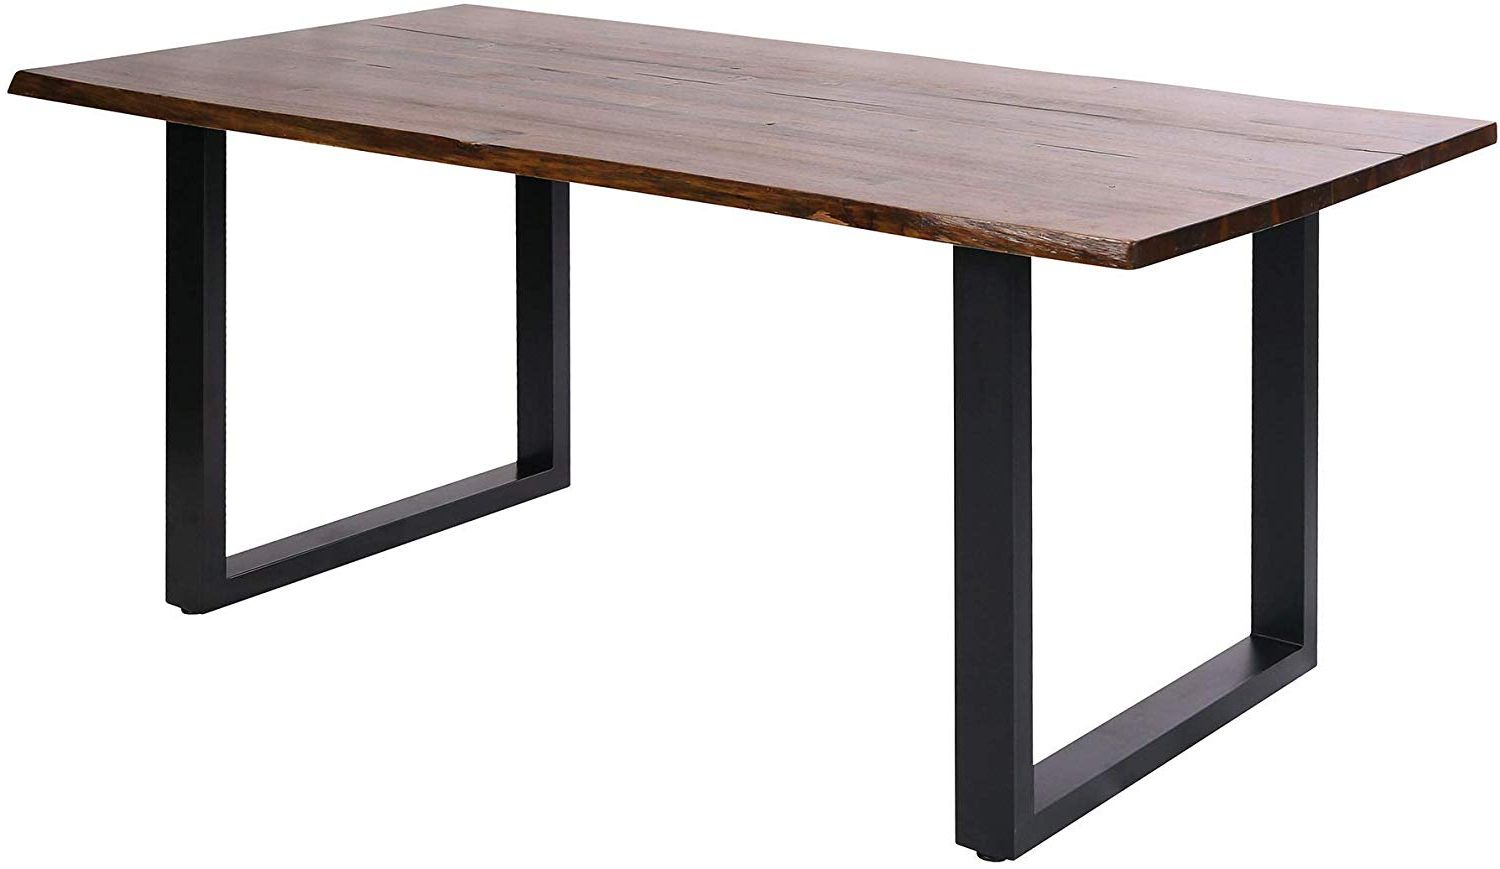 Amazon: Living Edge Dining Table In Natural Stain And Regarding Trendy Acacia Dining Tables With Black X Legs (View 13 of 30)